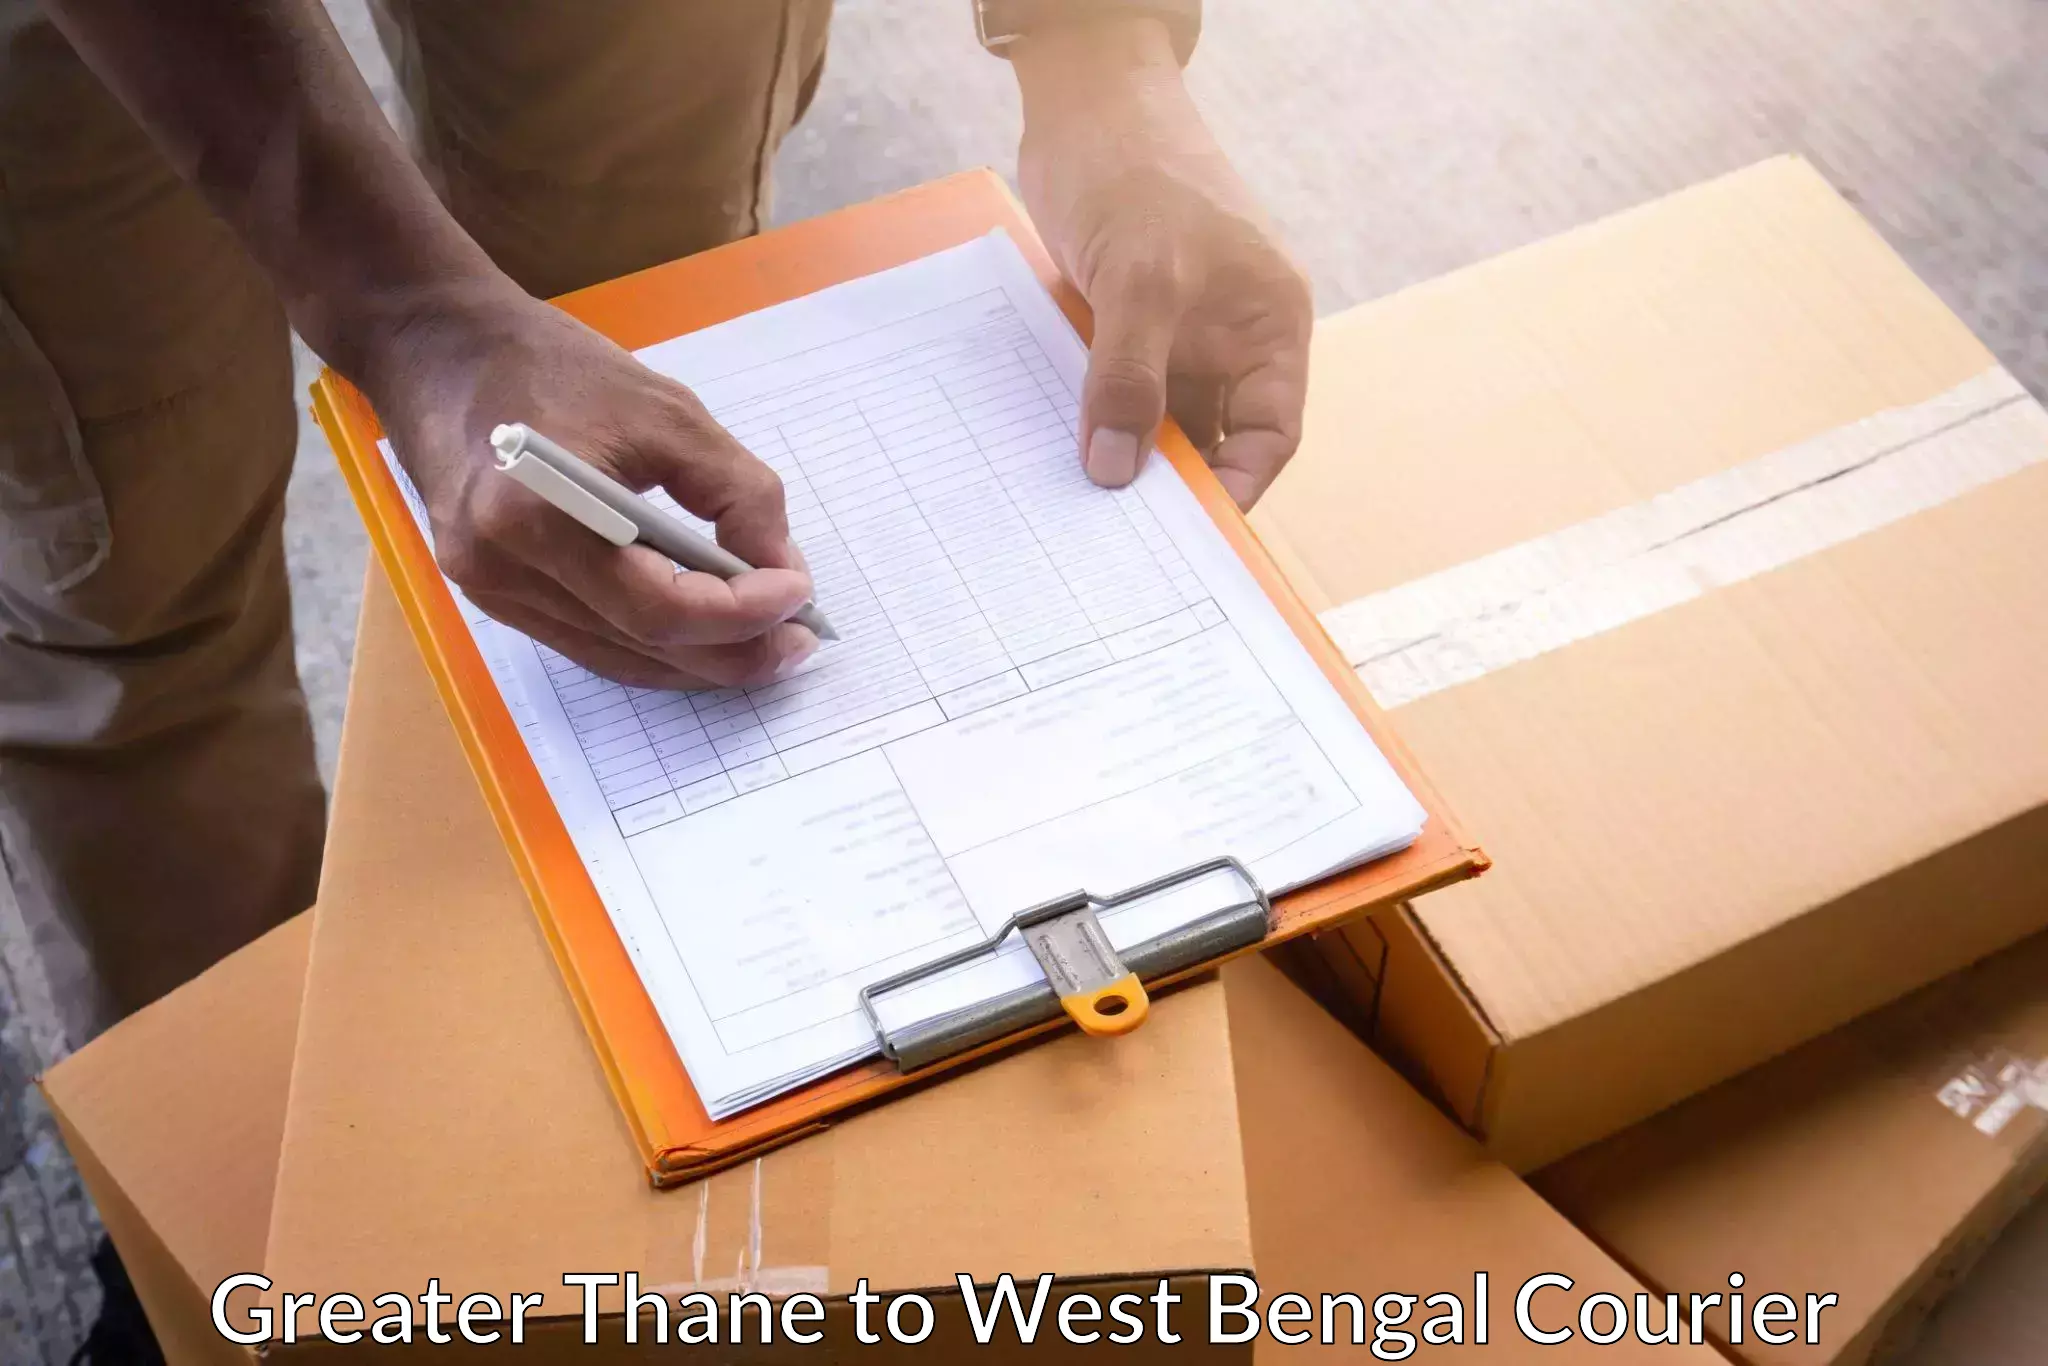 Courier service innovation Greater Thane to Bandel